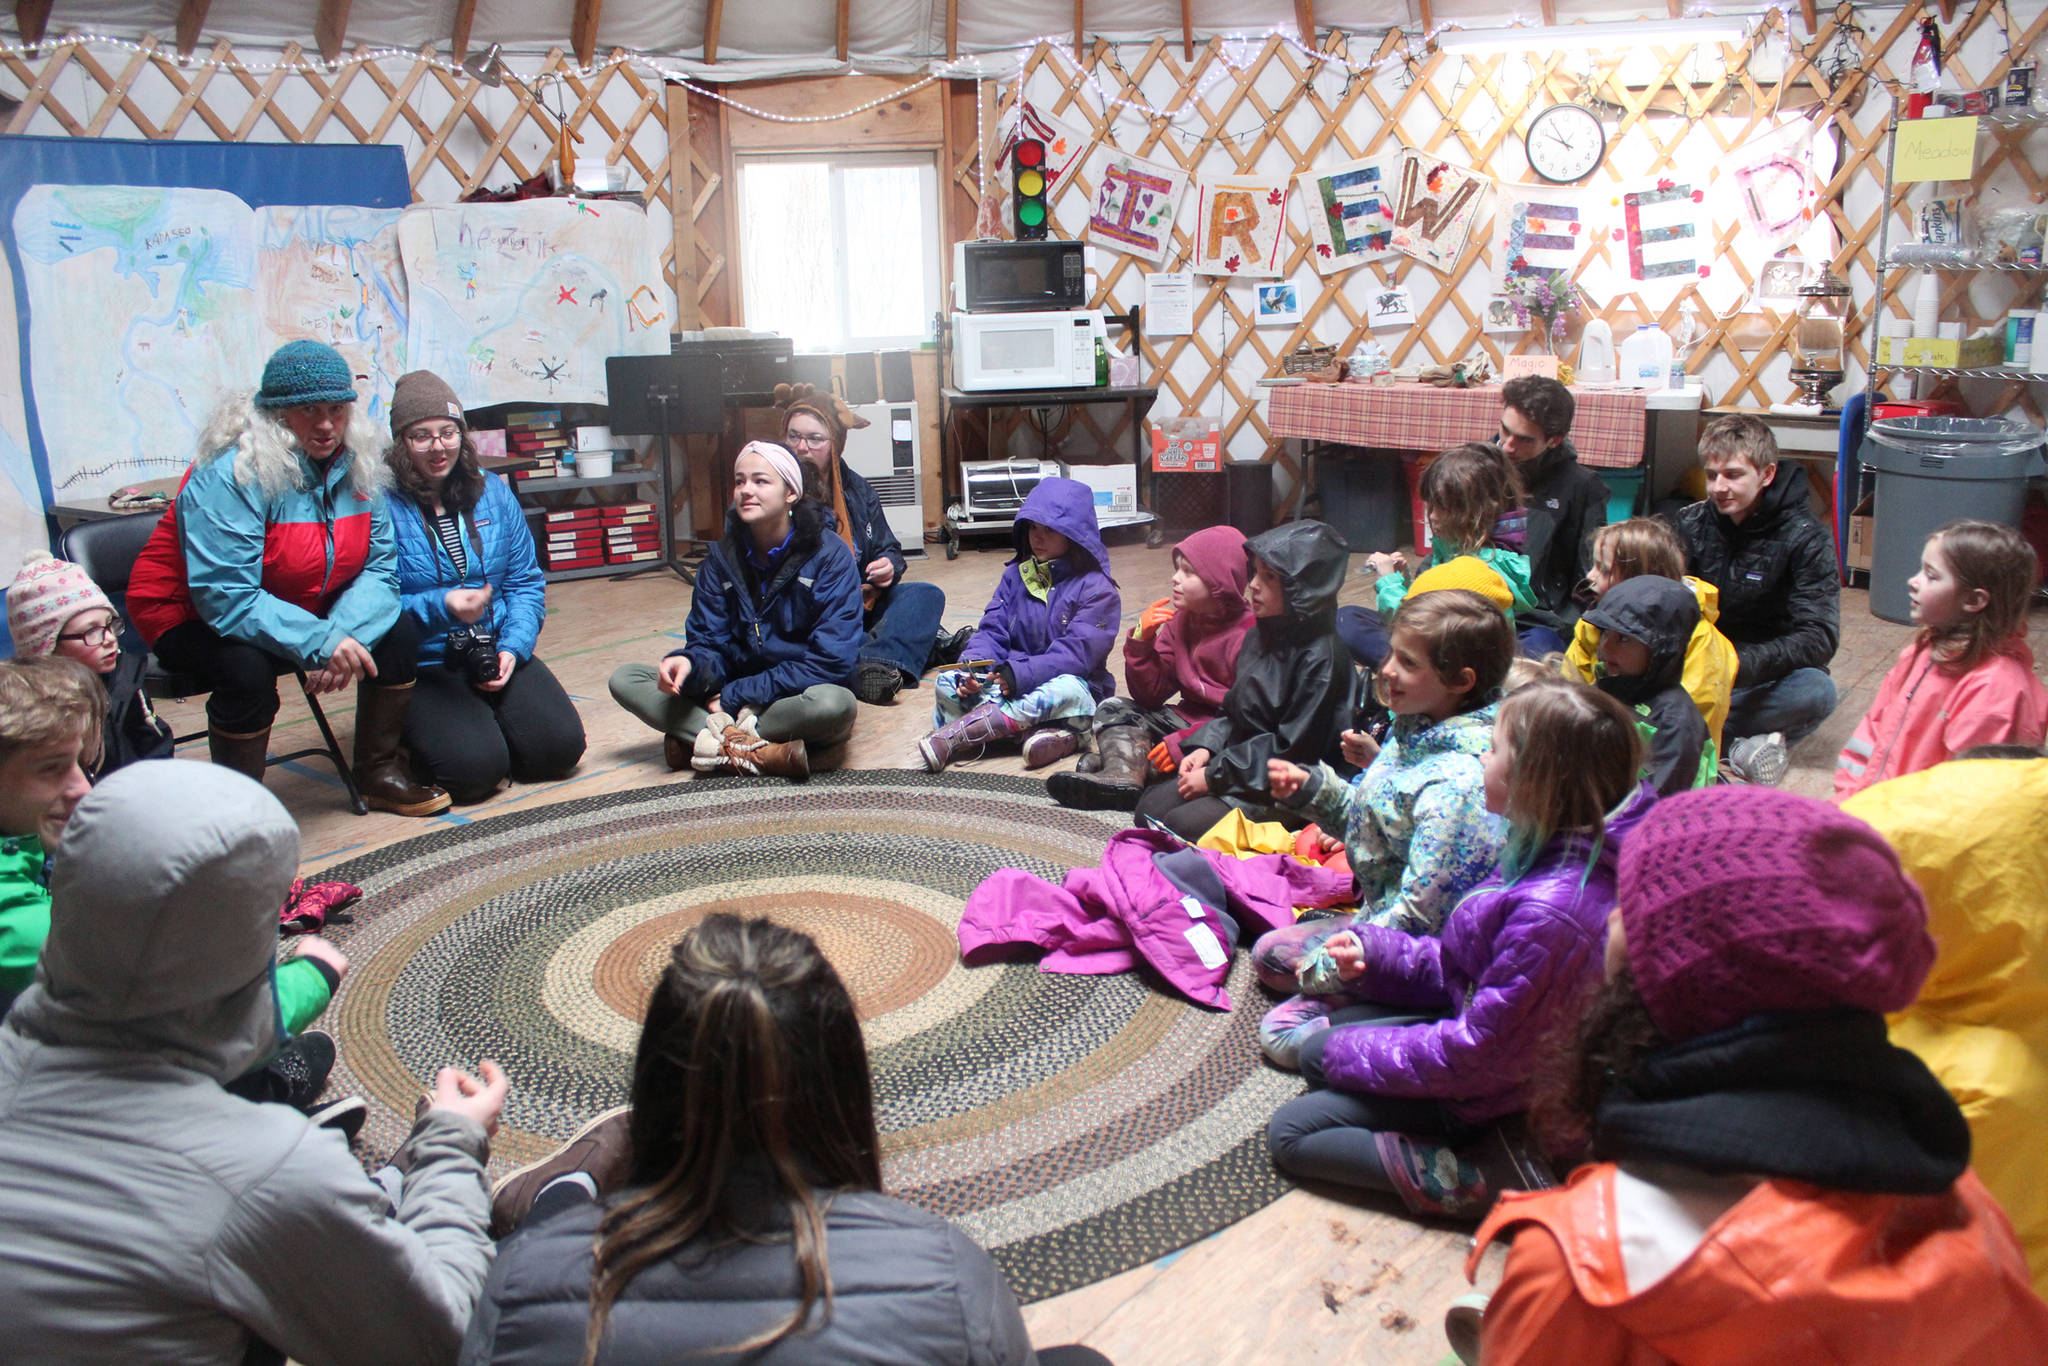 A group of Little Fireweed and Homer High School students talk about their morning together learning about the outdoors with teacher Kim Fine on Tuesday, April 24, 2018 at the school in Homer, Alaska. (Photo by Megan Pacer/Homer News)